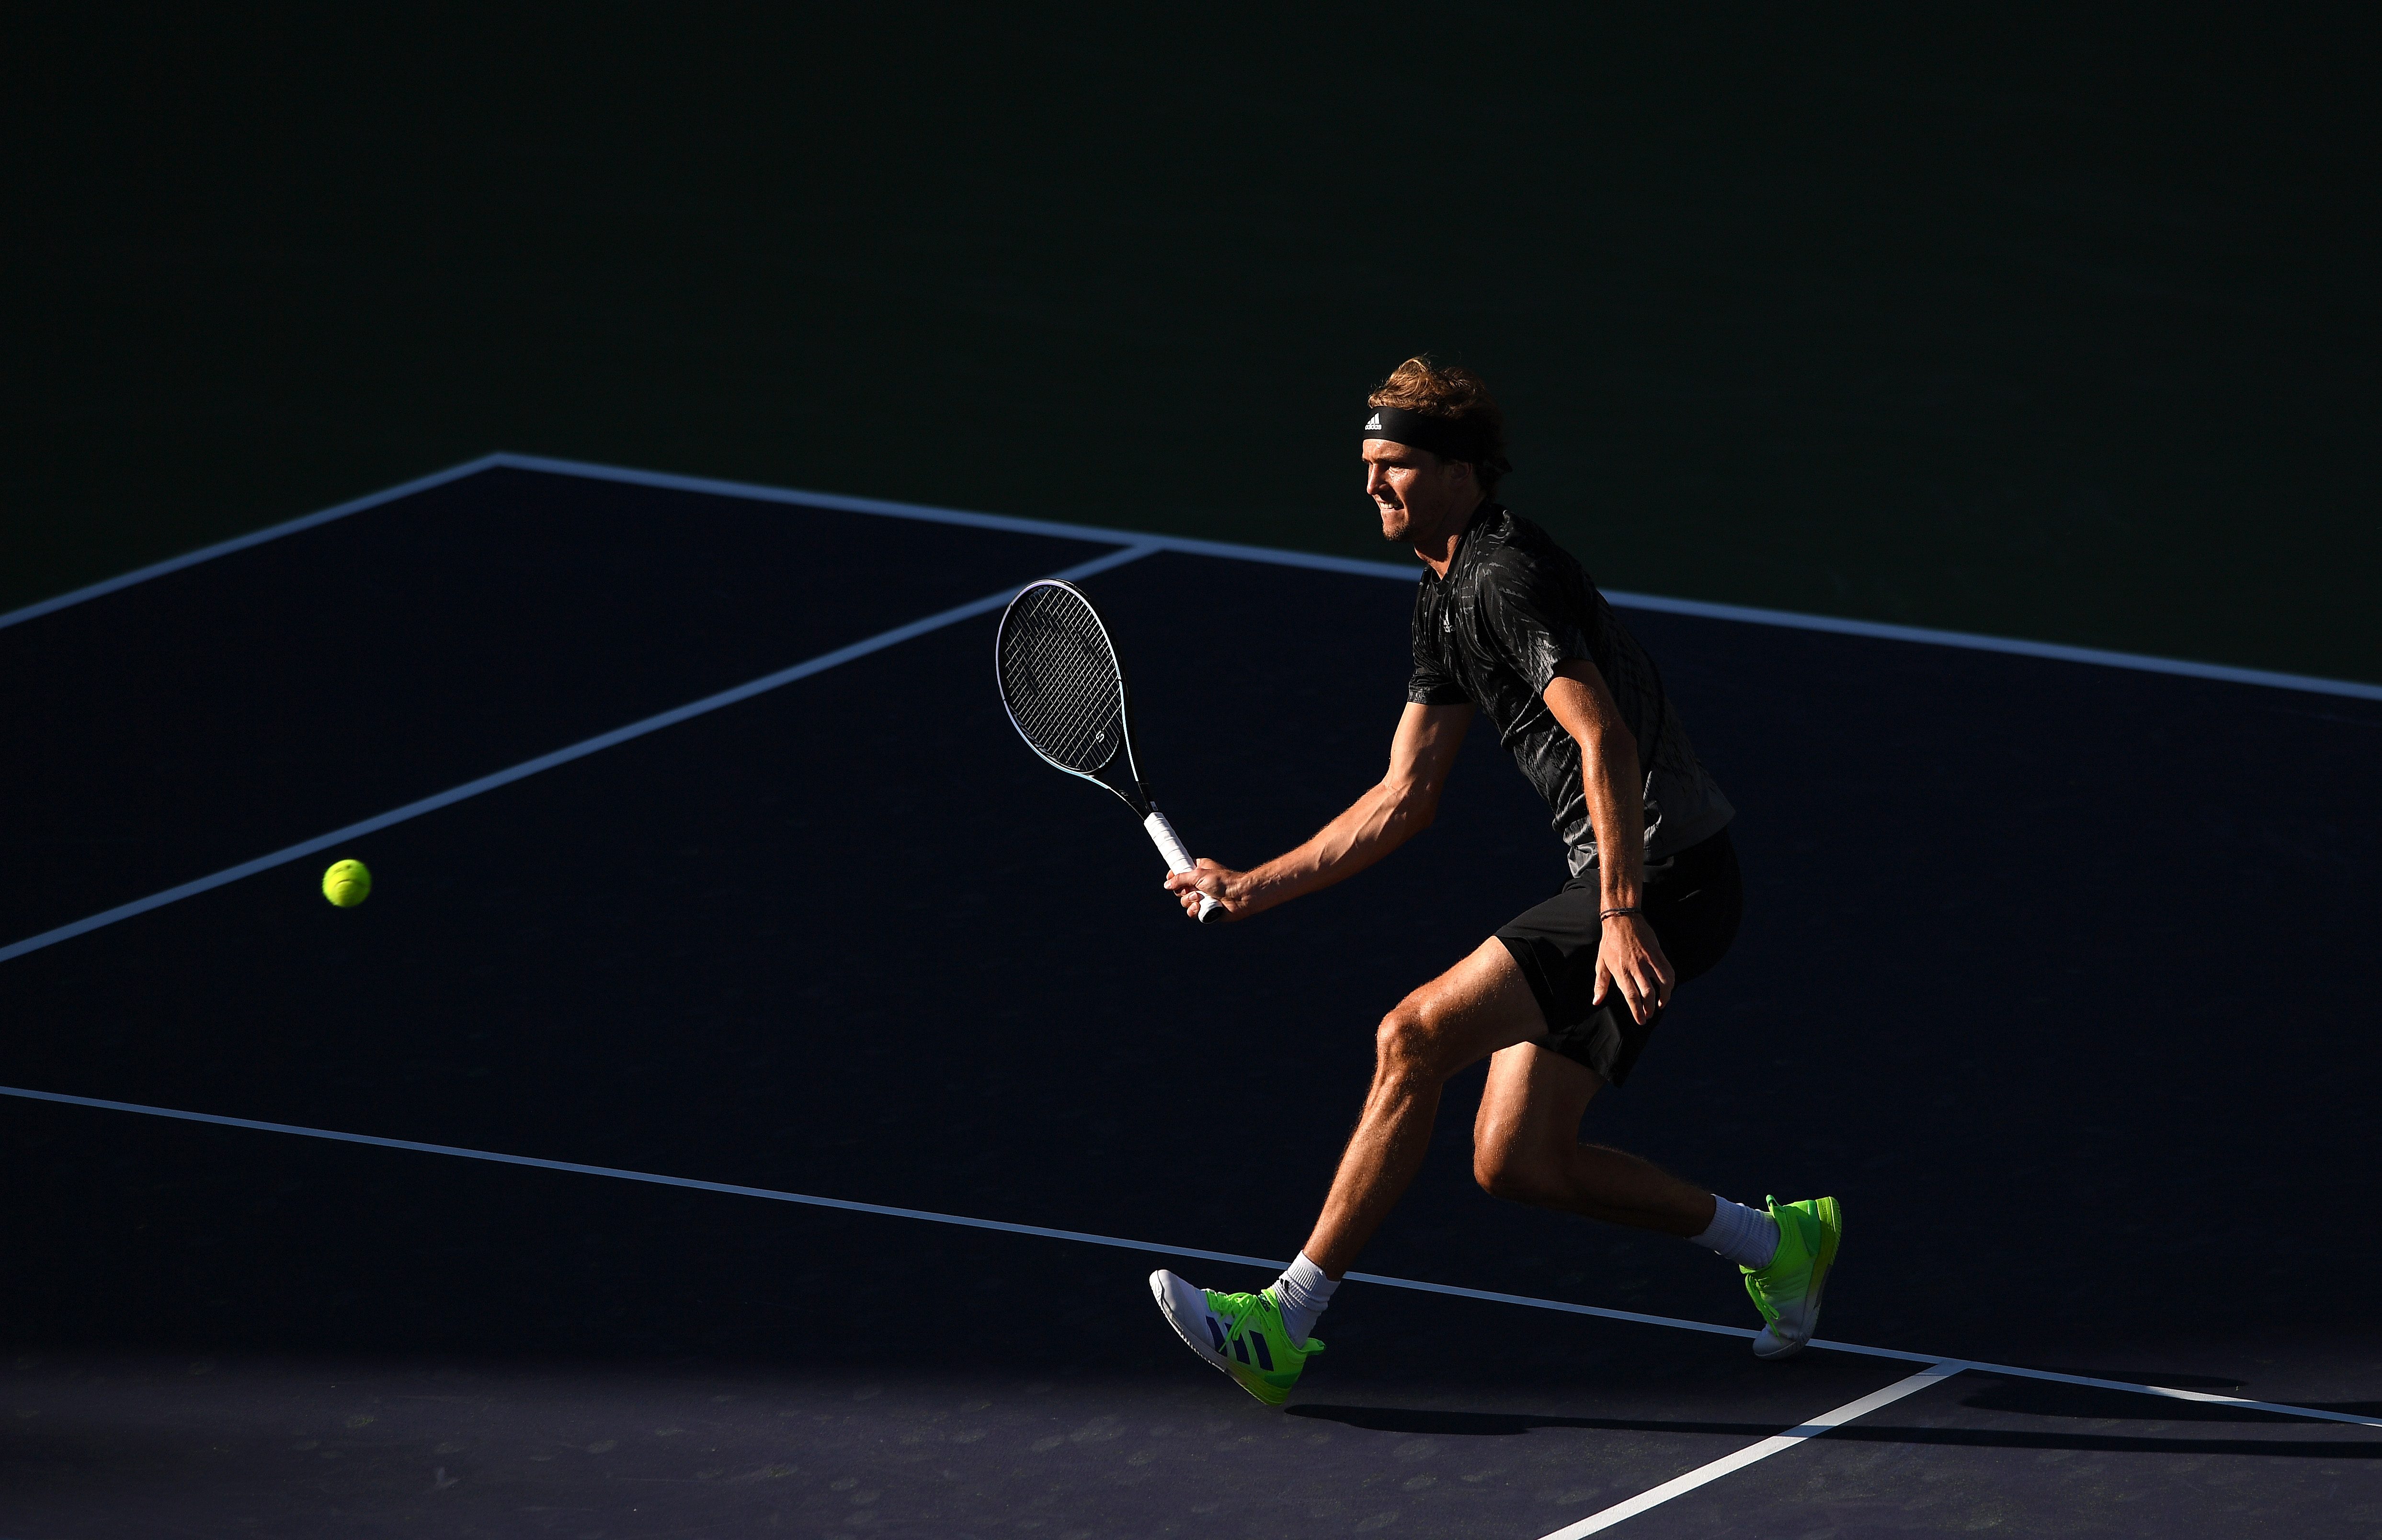 Zverev overcomes Brooksby at Indian Wells, qualifies for ATP Finals